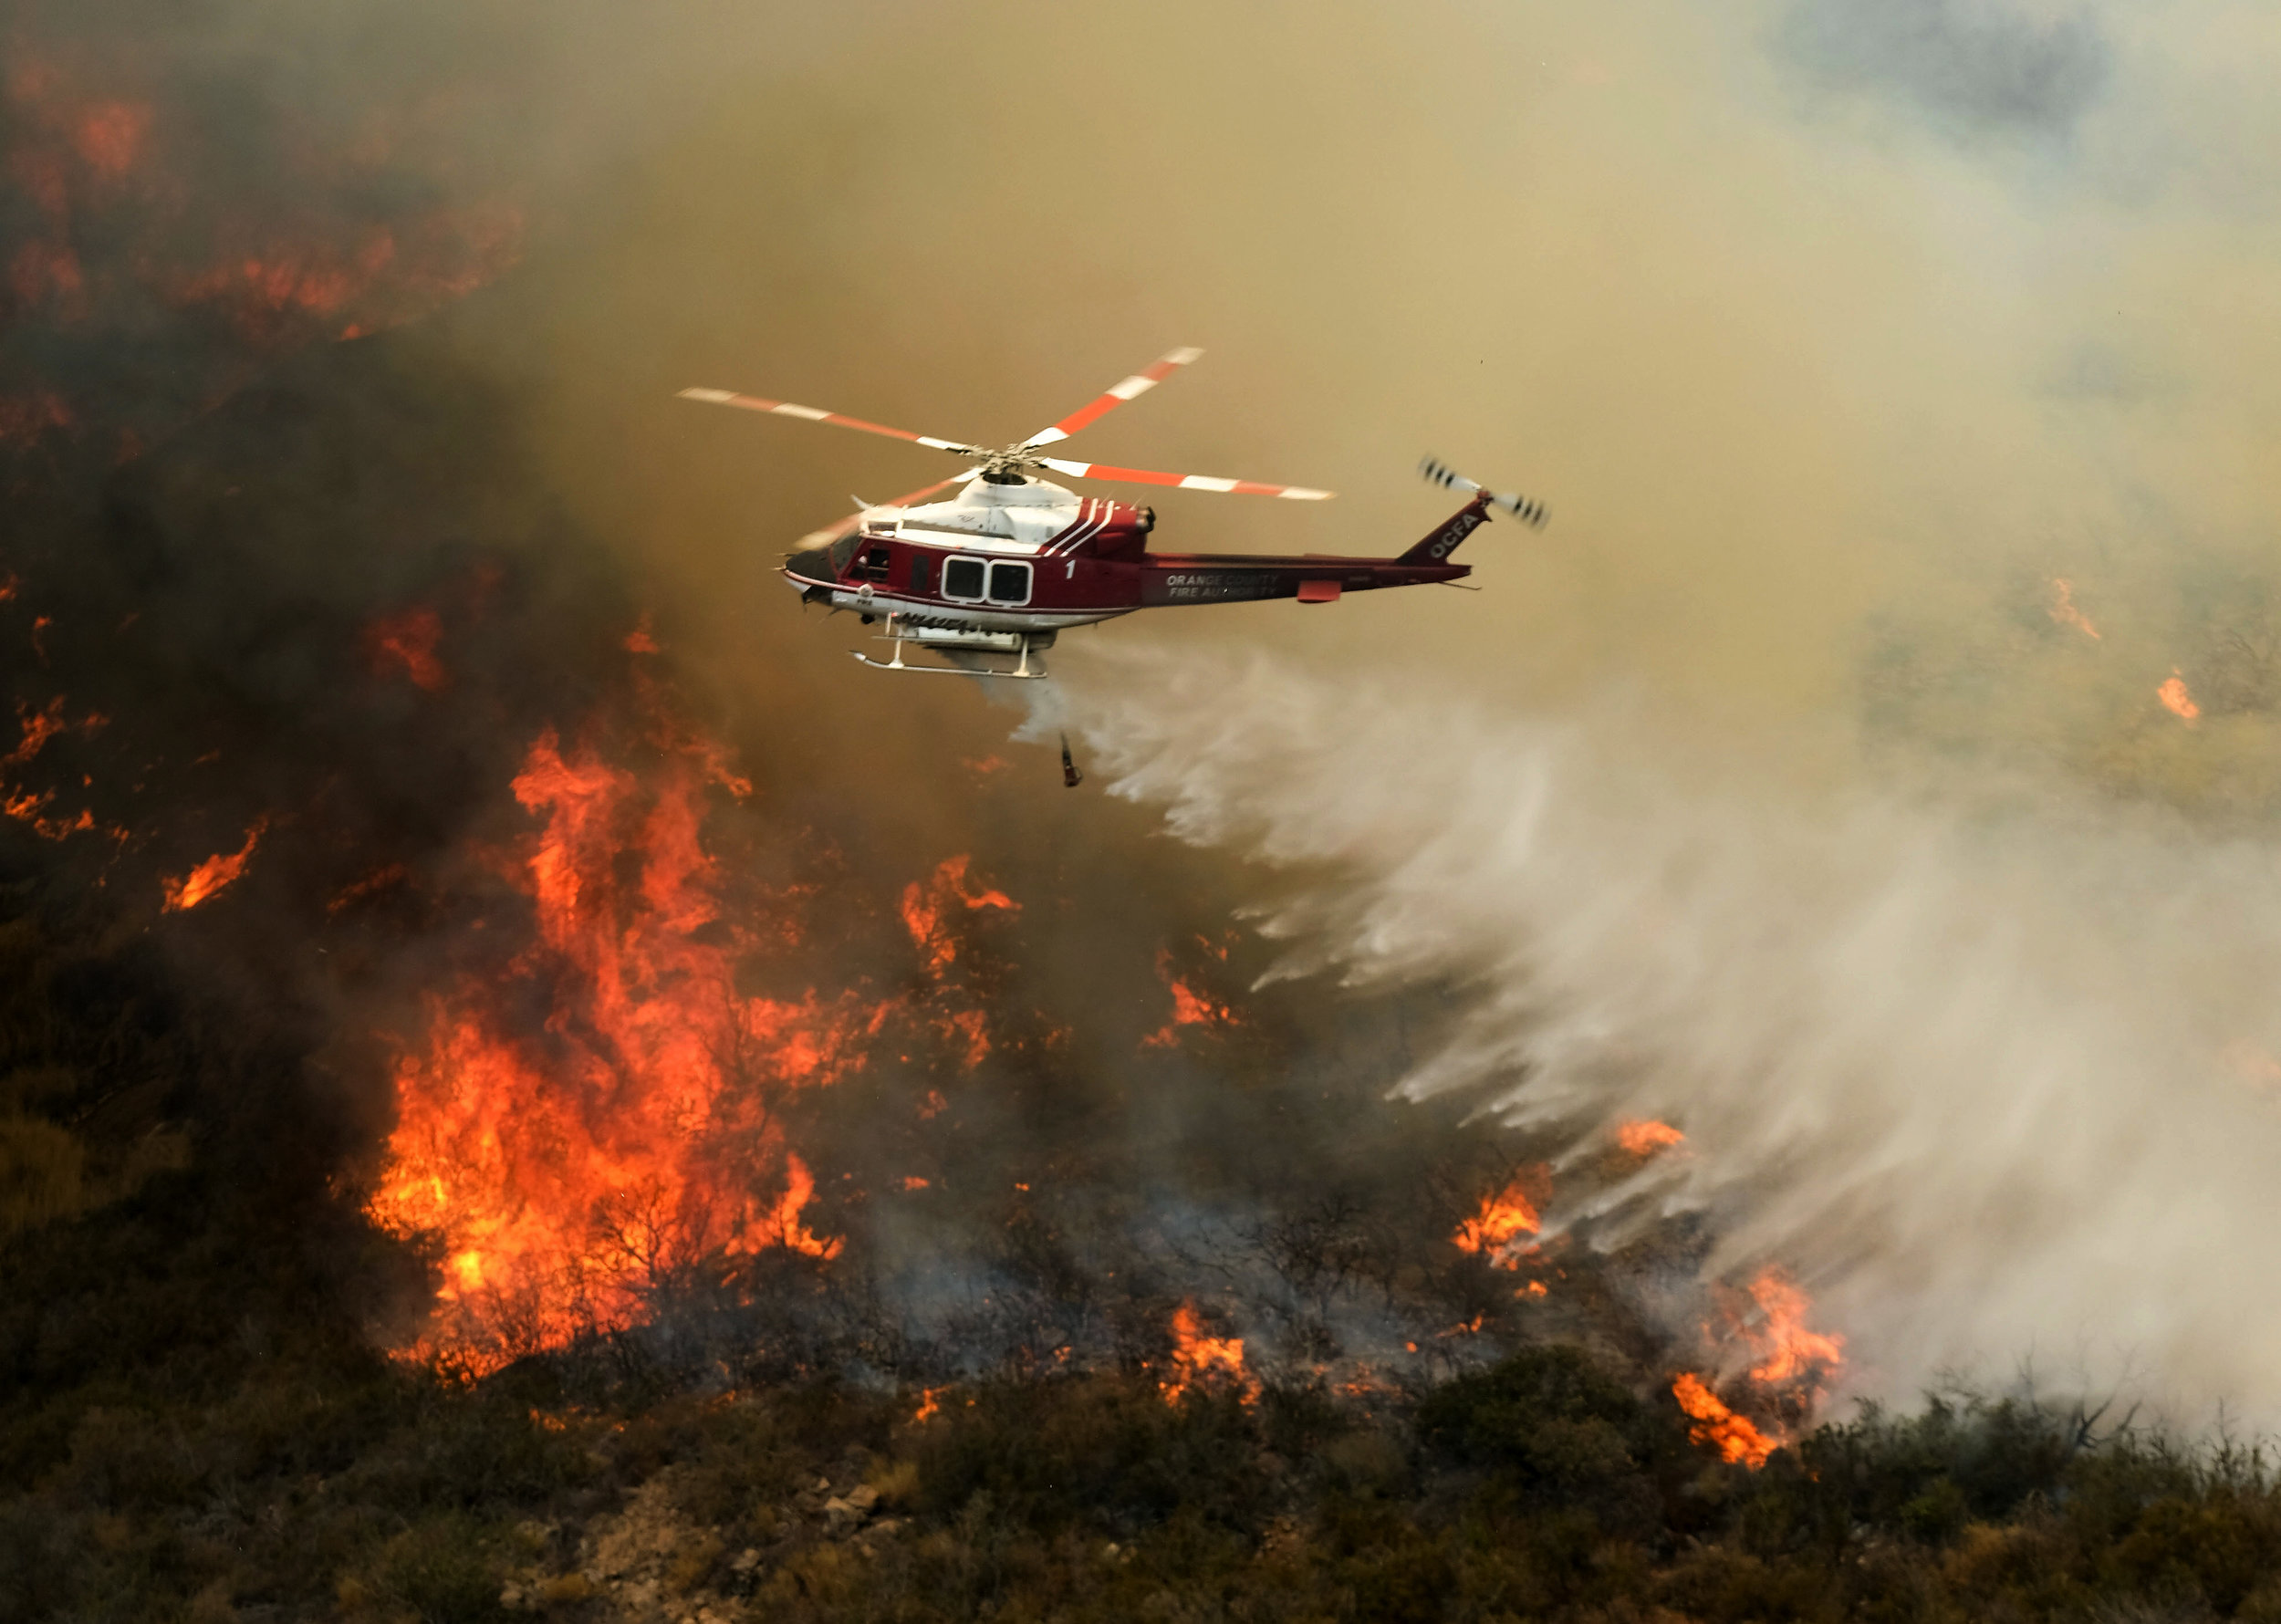  A helicopter drops water to a brush fire at the Holy Fire in Lake Elsinore, California, southeast of Los Angeles, on August 11, 2018. The fire has burned 21,473 acres and was 29 percent contained as of 8:30 a.m. Saturday, according to the Cleveland 